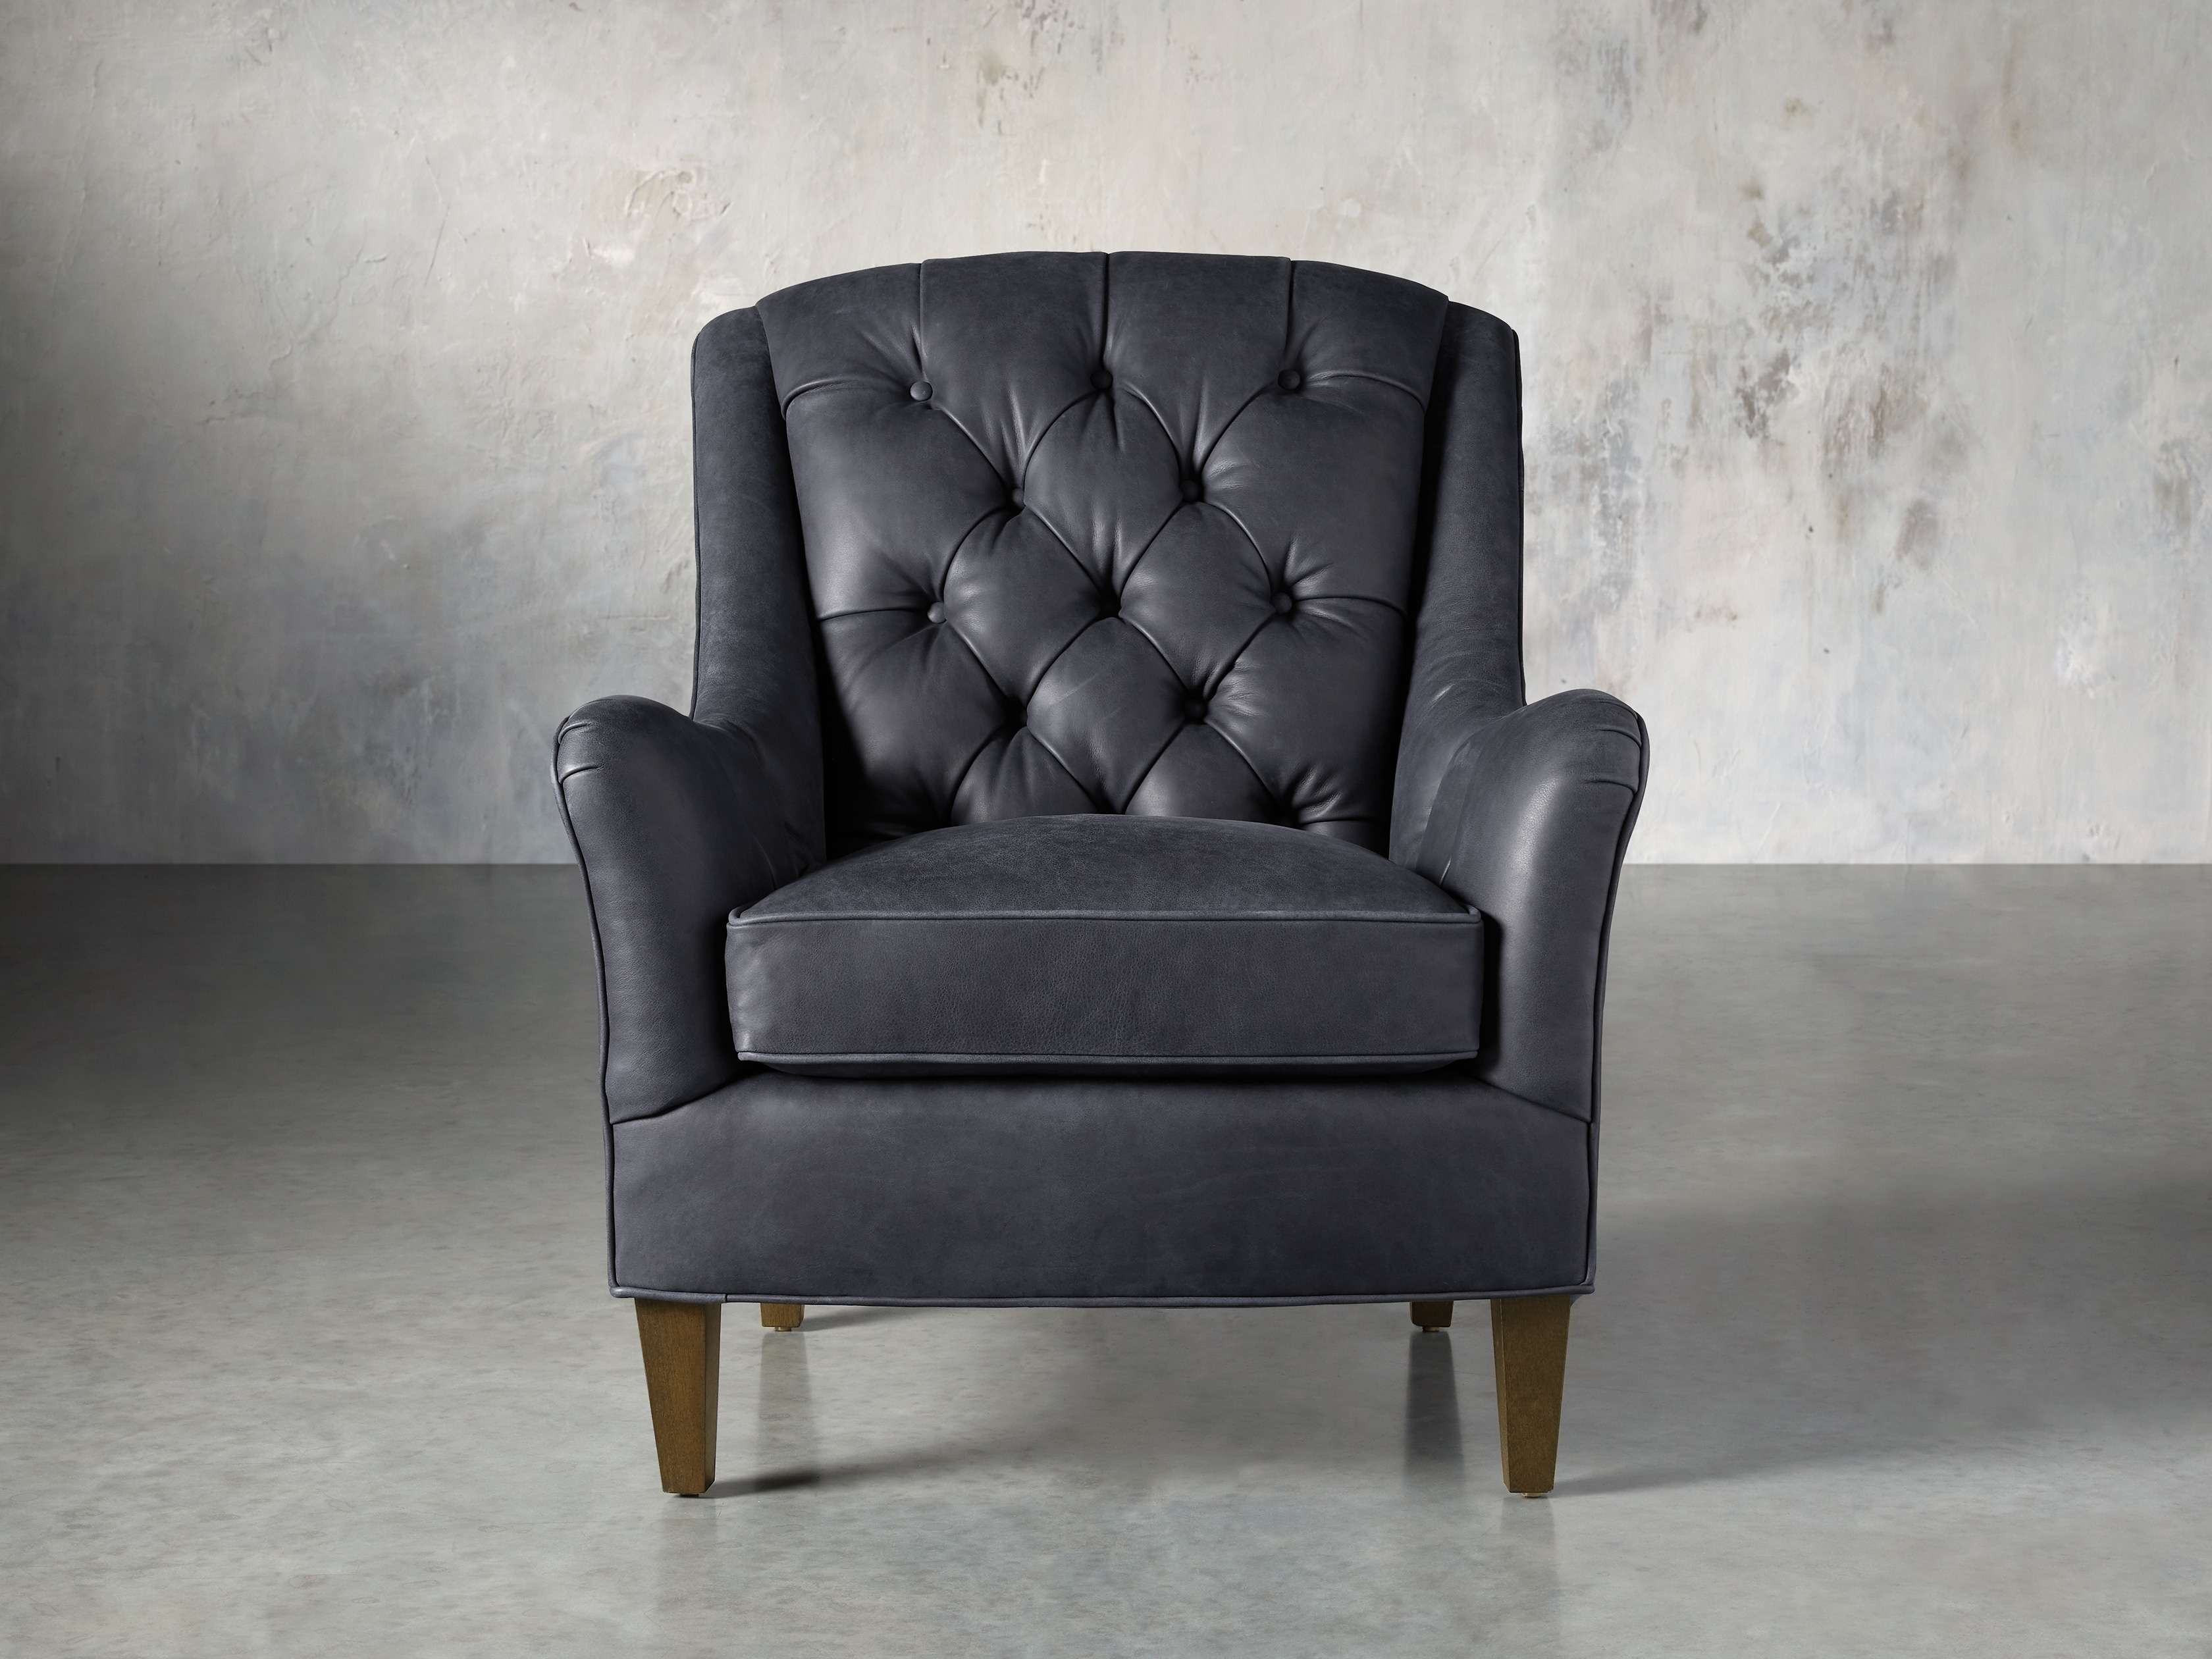 Lamont Leather Chair Arhaus, Plush Leather Chair